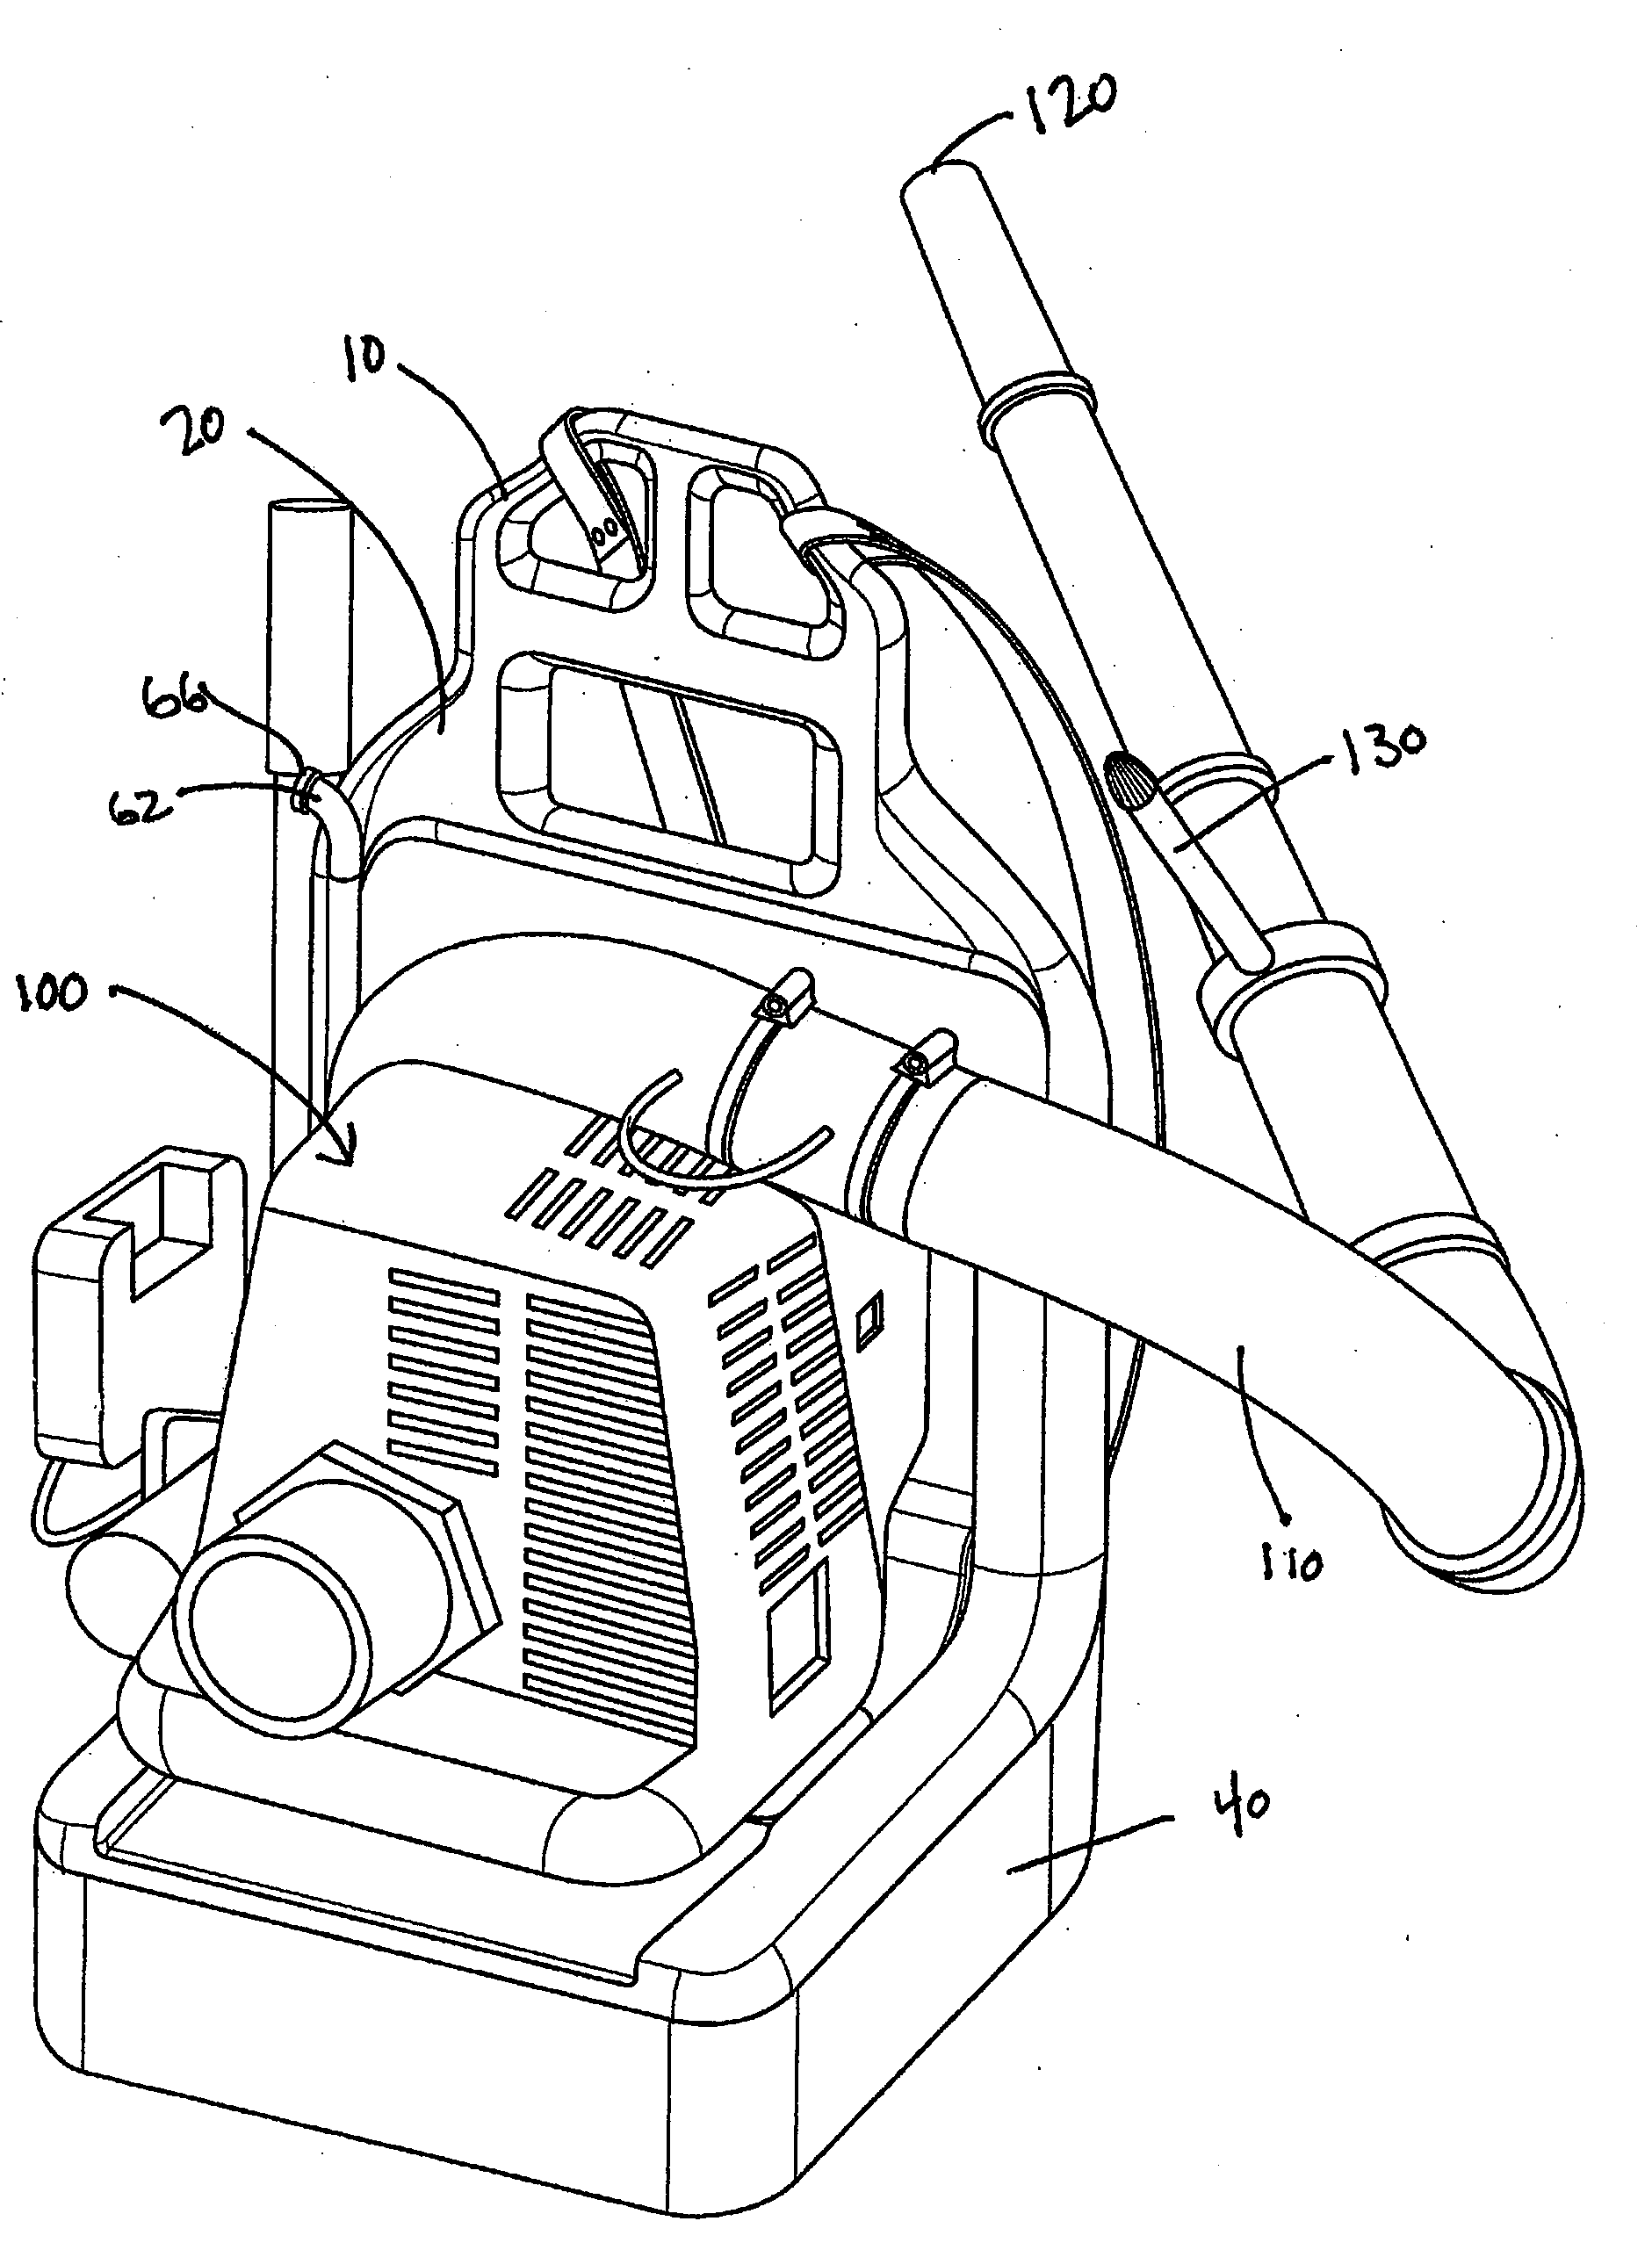 Apparatus and method for distributing a fluid